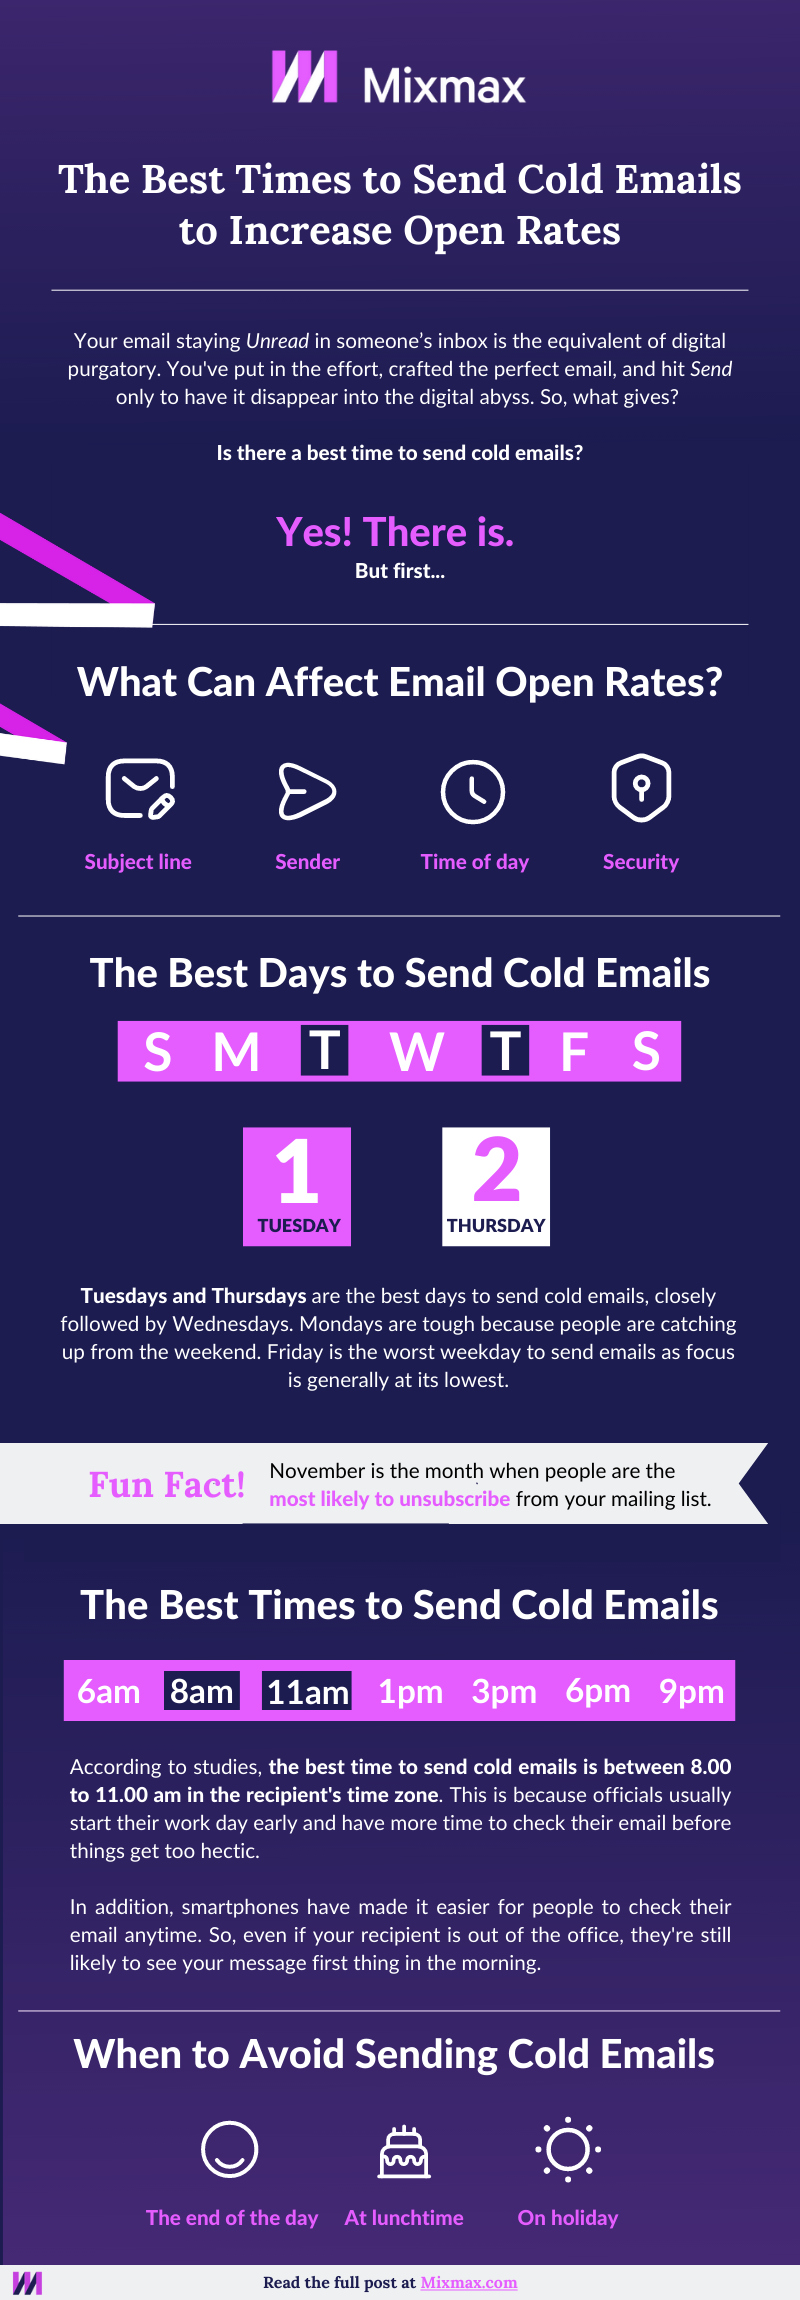 Infographic - Best Times to Send Cold Emails